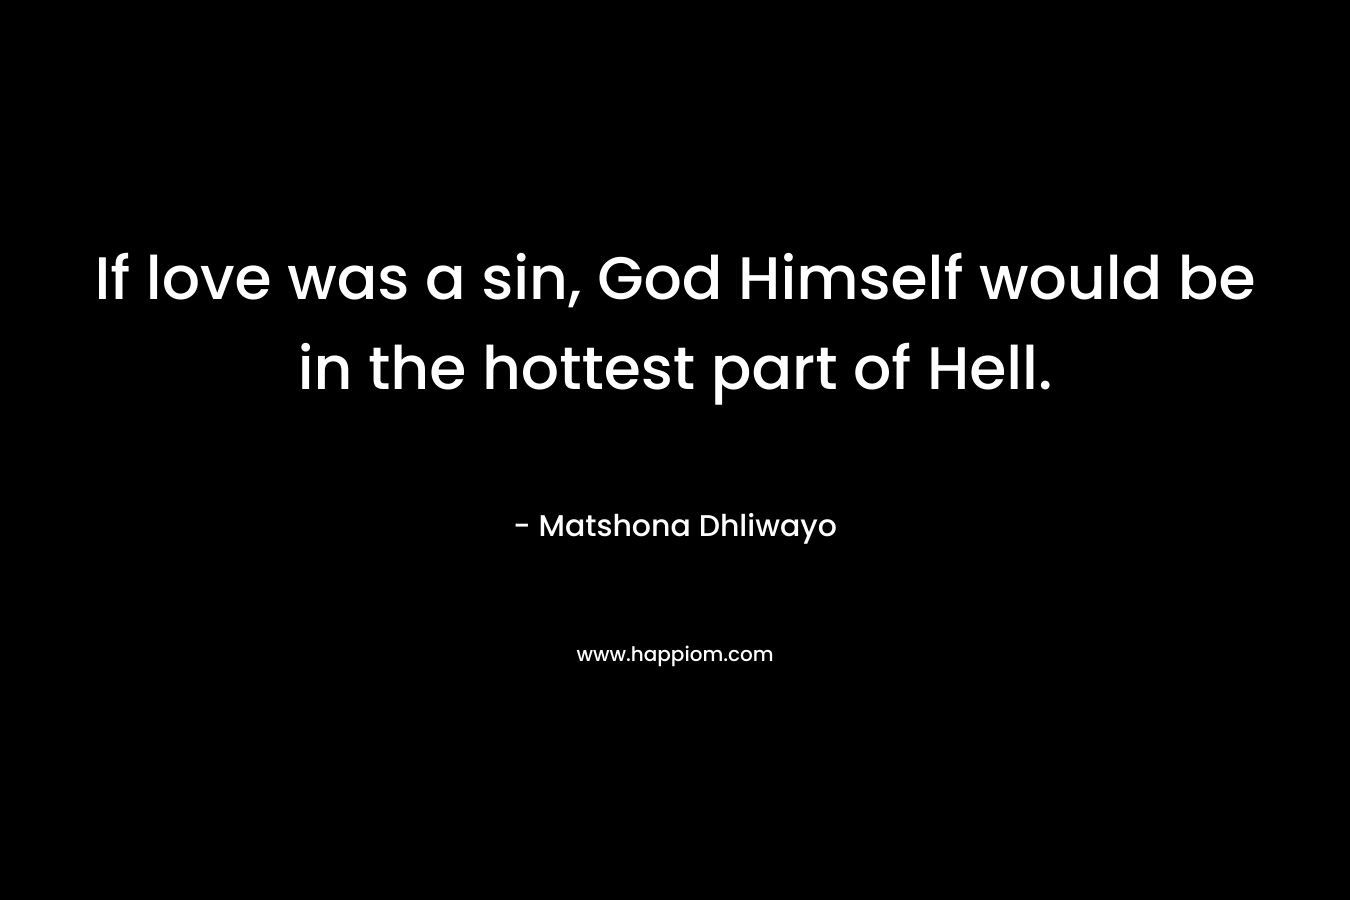 If love was a sin, God Himself would be in the hottest part of Hell.